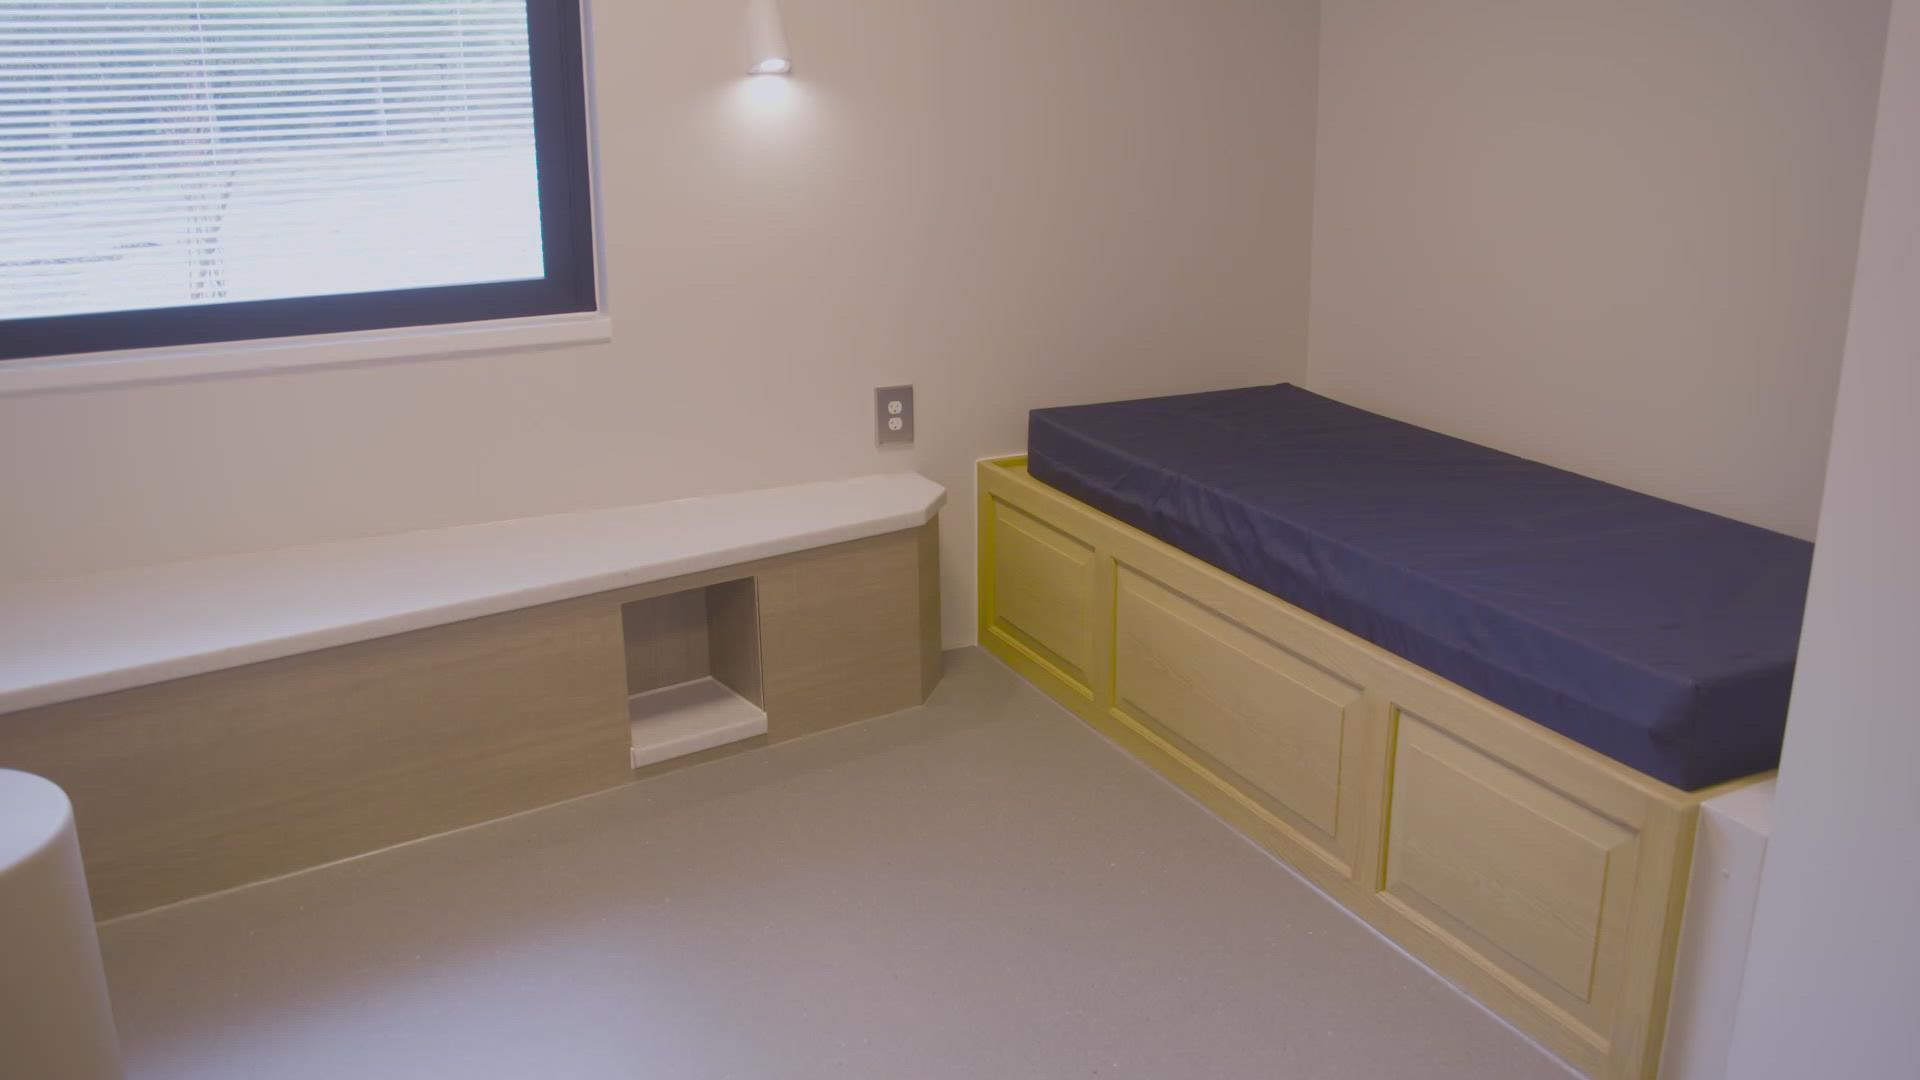 The treatment center will relocate 16 patients at Western State Hospital who are taking beds for mentally ill inmates sitting in jails across the state.